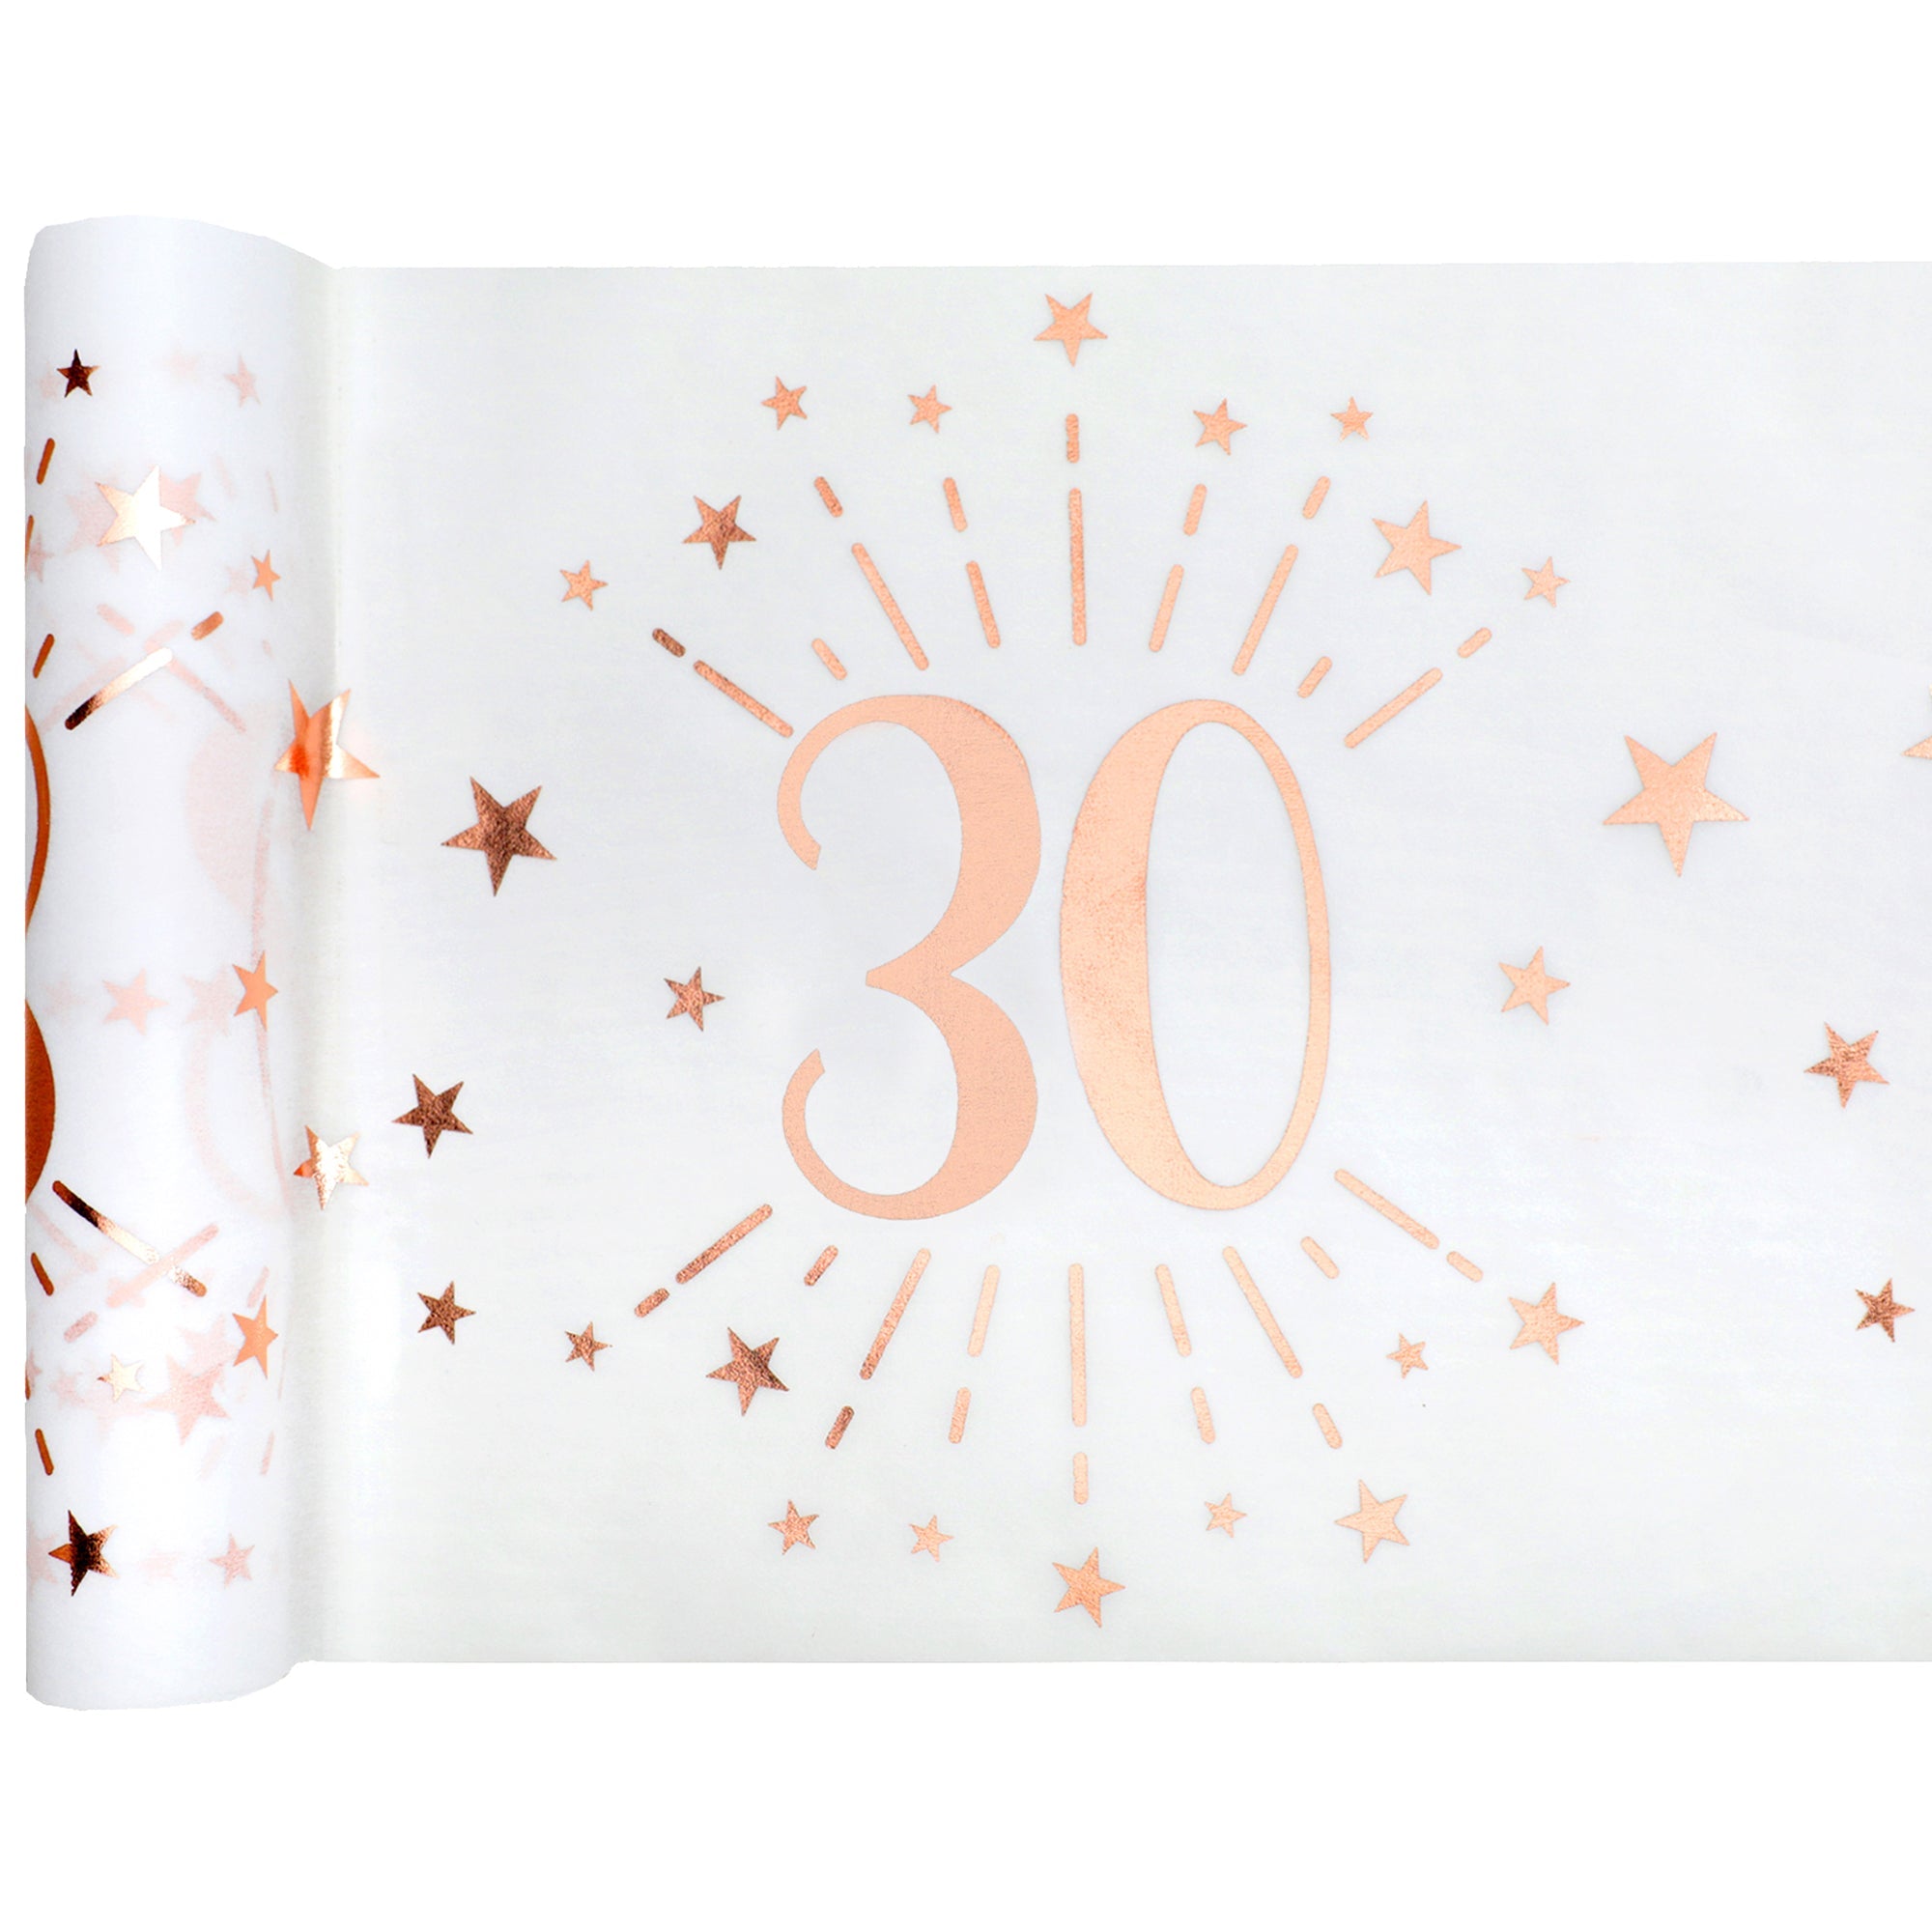 Sparkling Age 30 Table Runner Rose Gold 12x195in